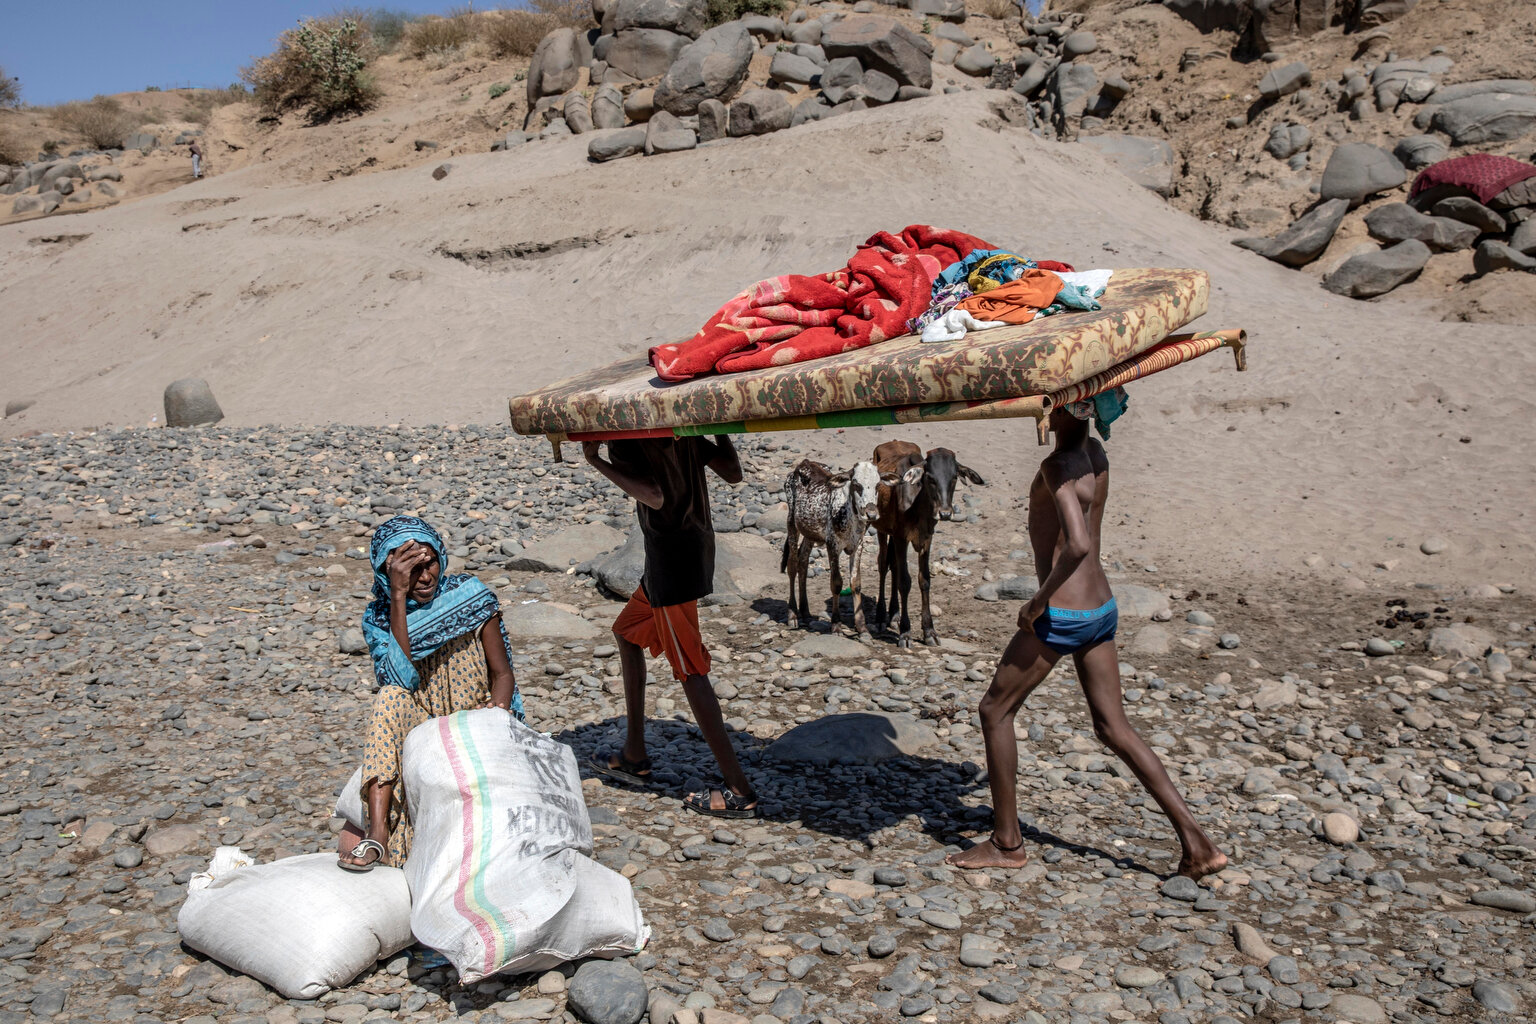  Tigray refugees who fled the conflict in the Ethiopia's Tigray carry their furniture on the banks of the Tekeze River on the Sudan-Ethiopia border, in Hamdayet, eastern Sudan, Tuesday, Dec. 1, 2020. The elderly woman waits for her family with their 